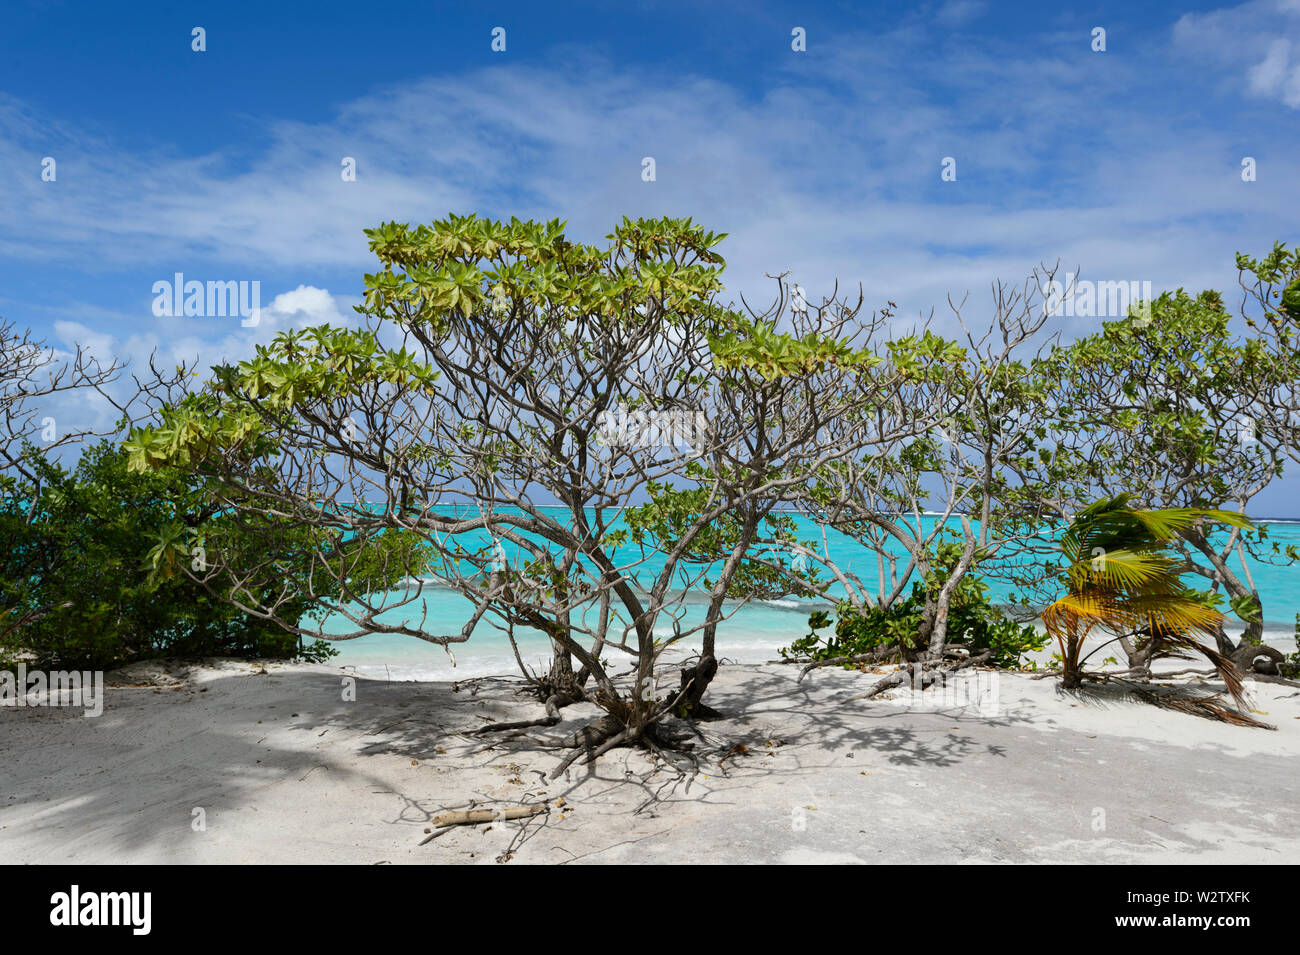 View of low coastal vegetation in white sand in front of the turquoise lagoon of Aitutaki, Cook Islands, Polynesia Stock Photo